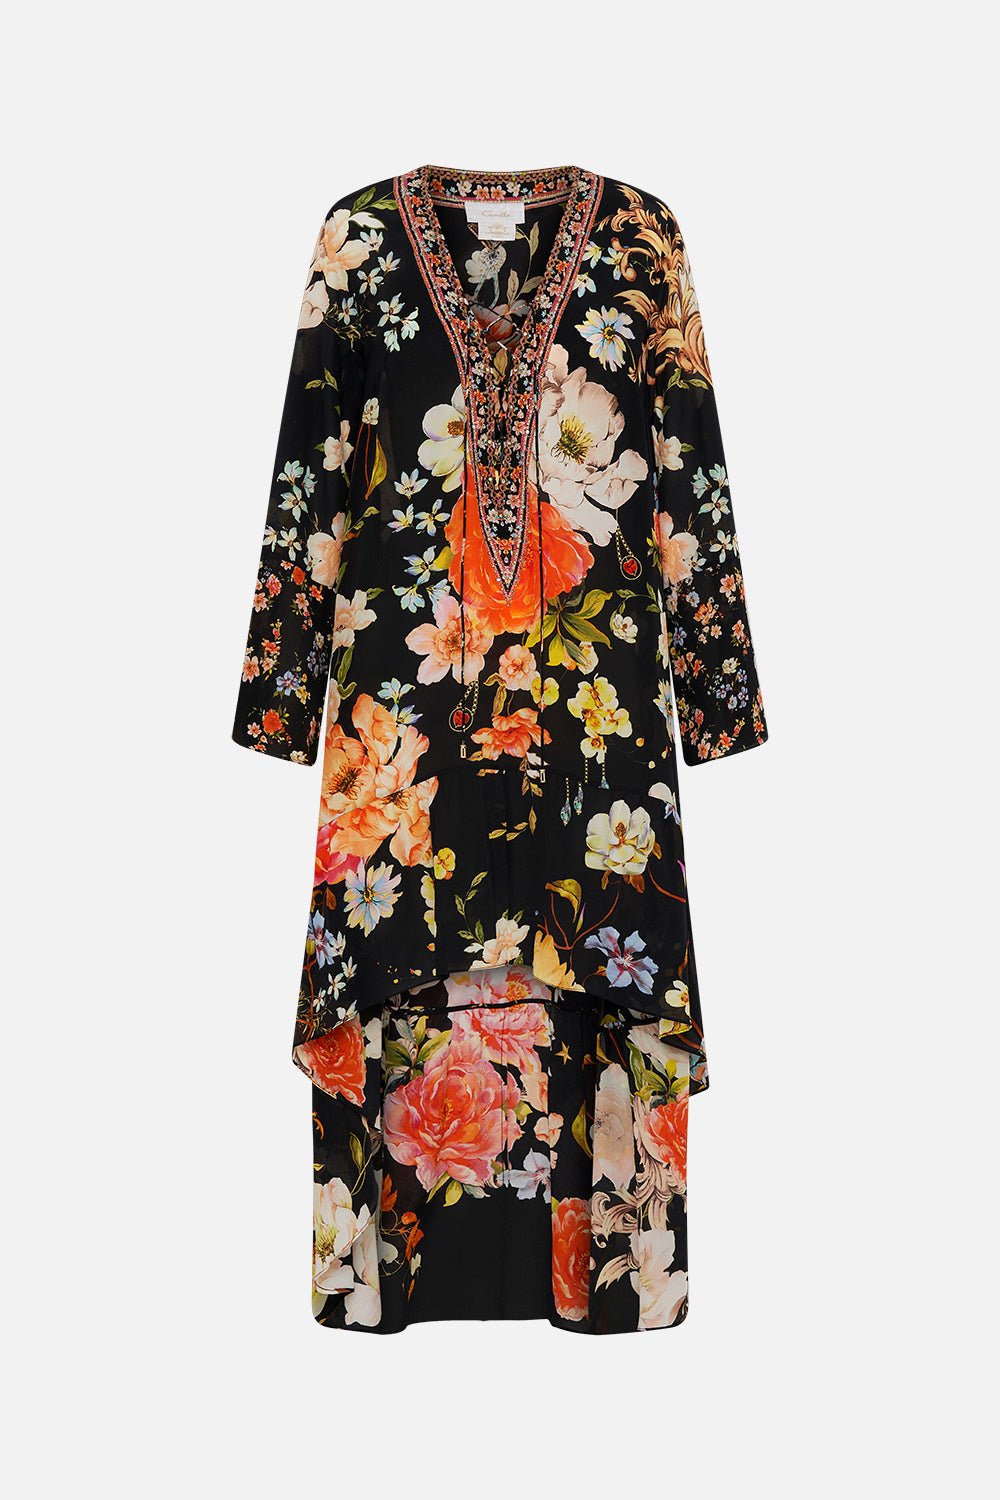 Product view of CAMILLA floral silk dress in Secret History print